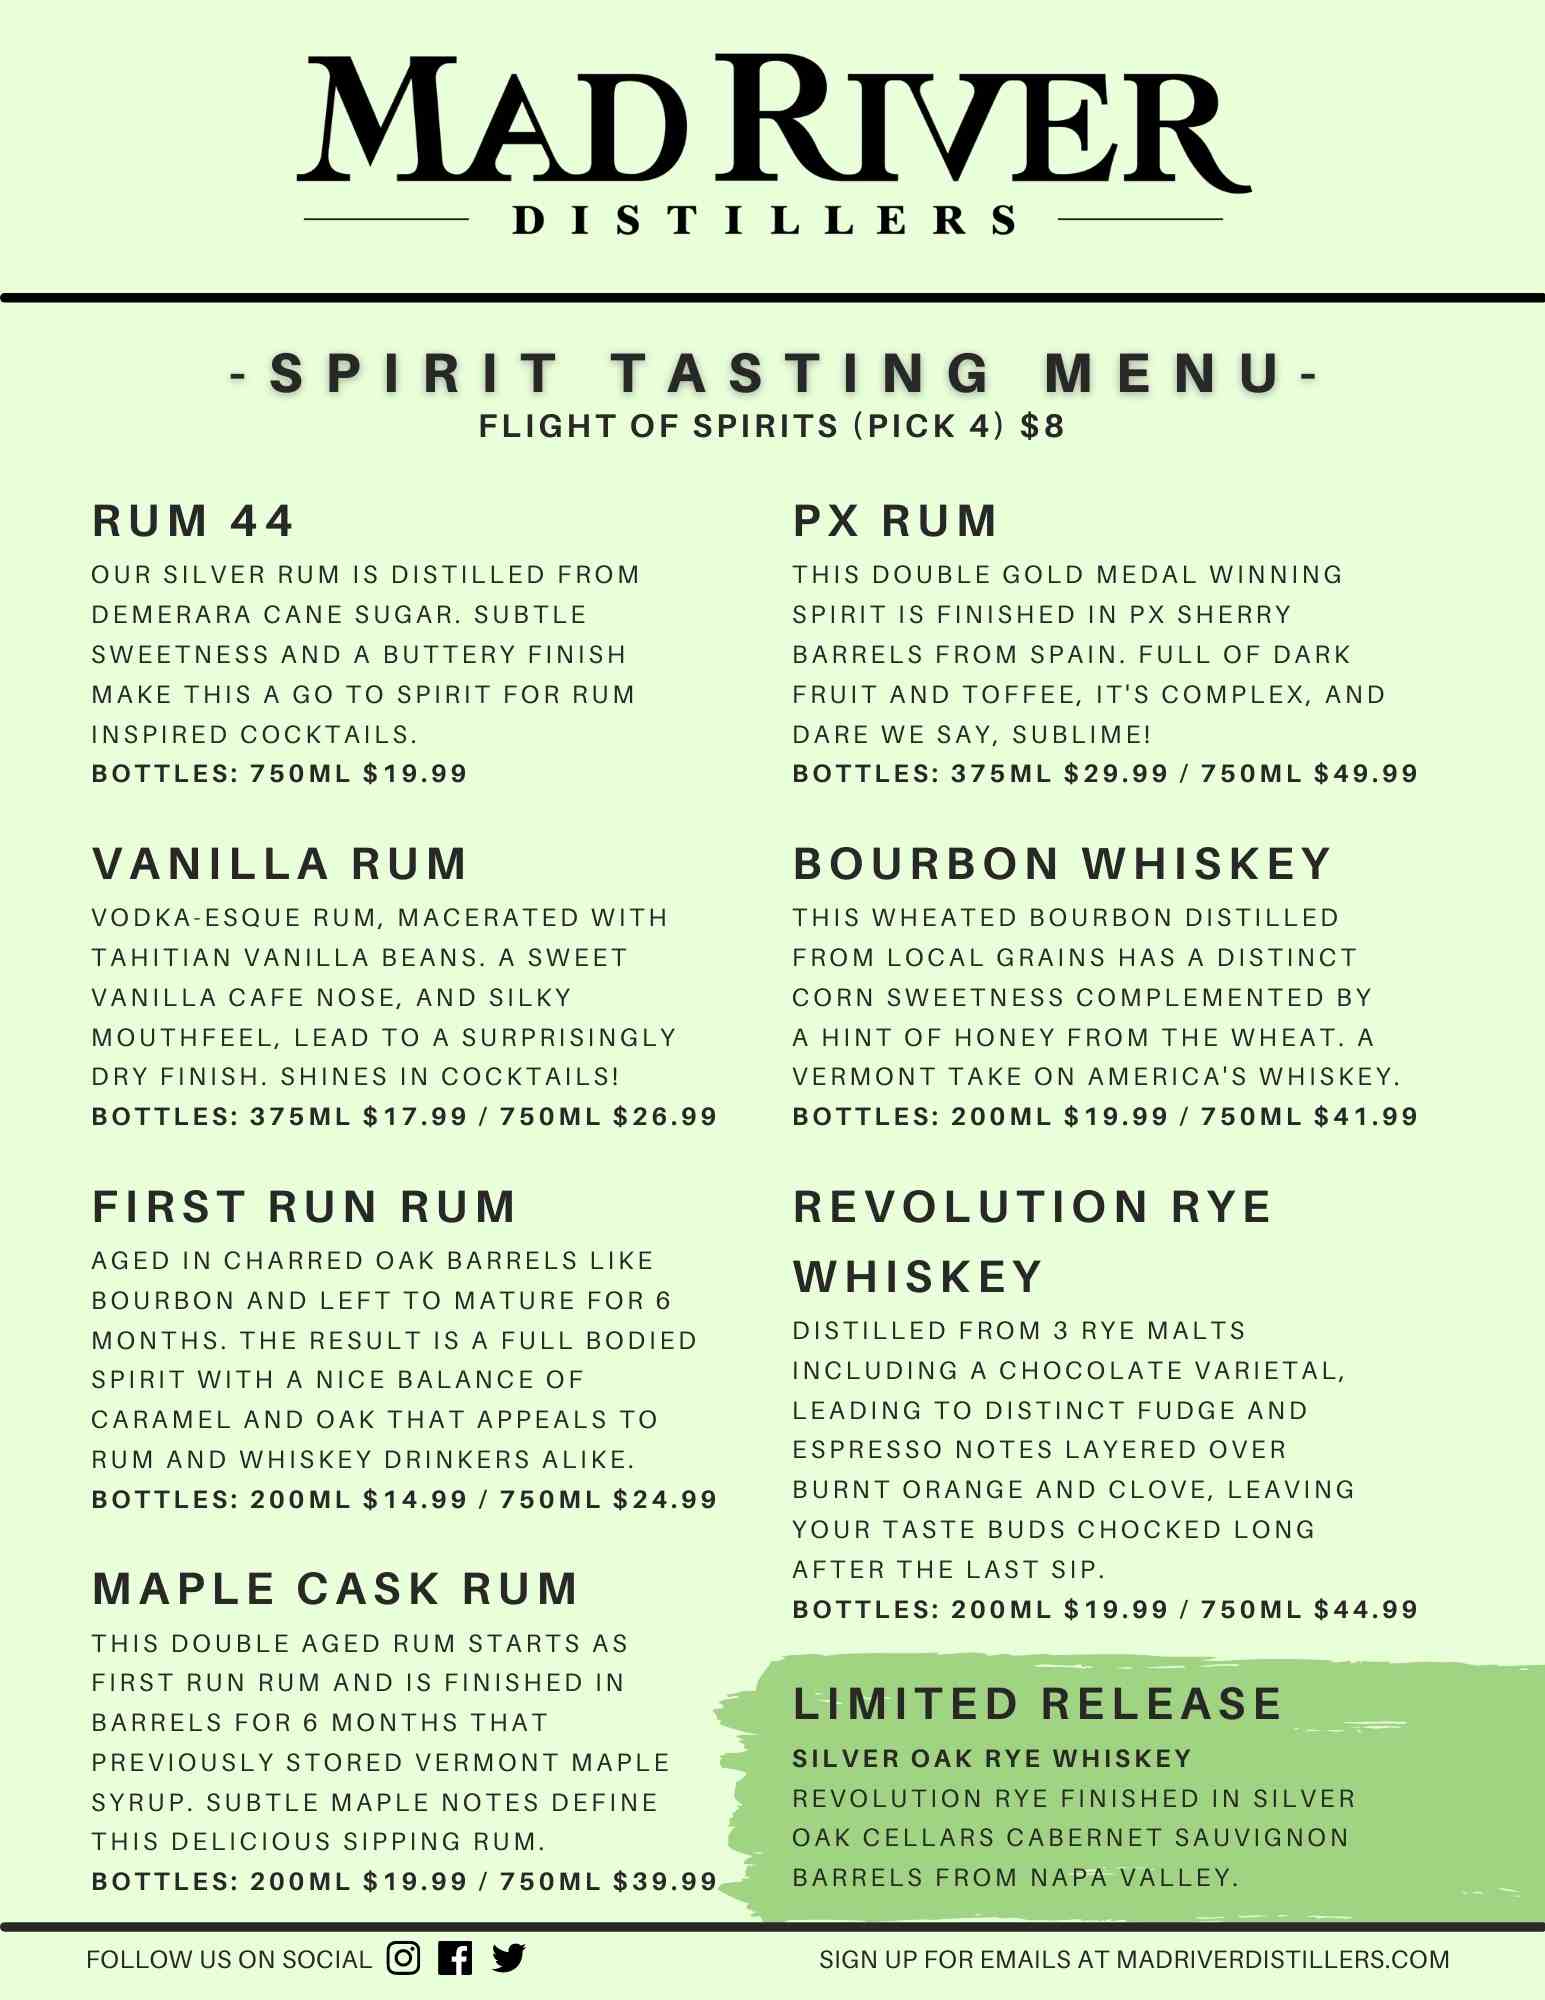 Spirit Tasting Menu: Rum 44, Vanilla Rum, First Run Rum, Maple Cask Rum, PX Rum, Bourbon Whiskey, Revolution Rye Whiskey. Flight of Spirits (pick 4) for $6. Ask about our limited releases.